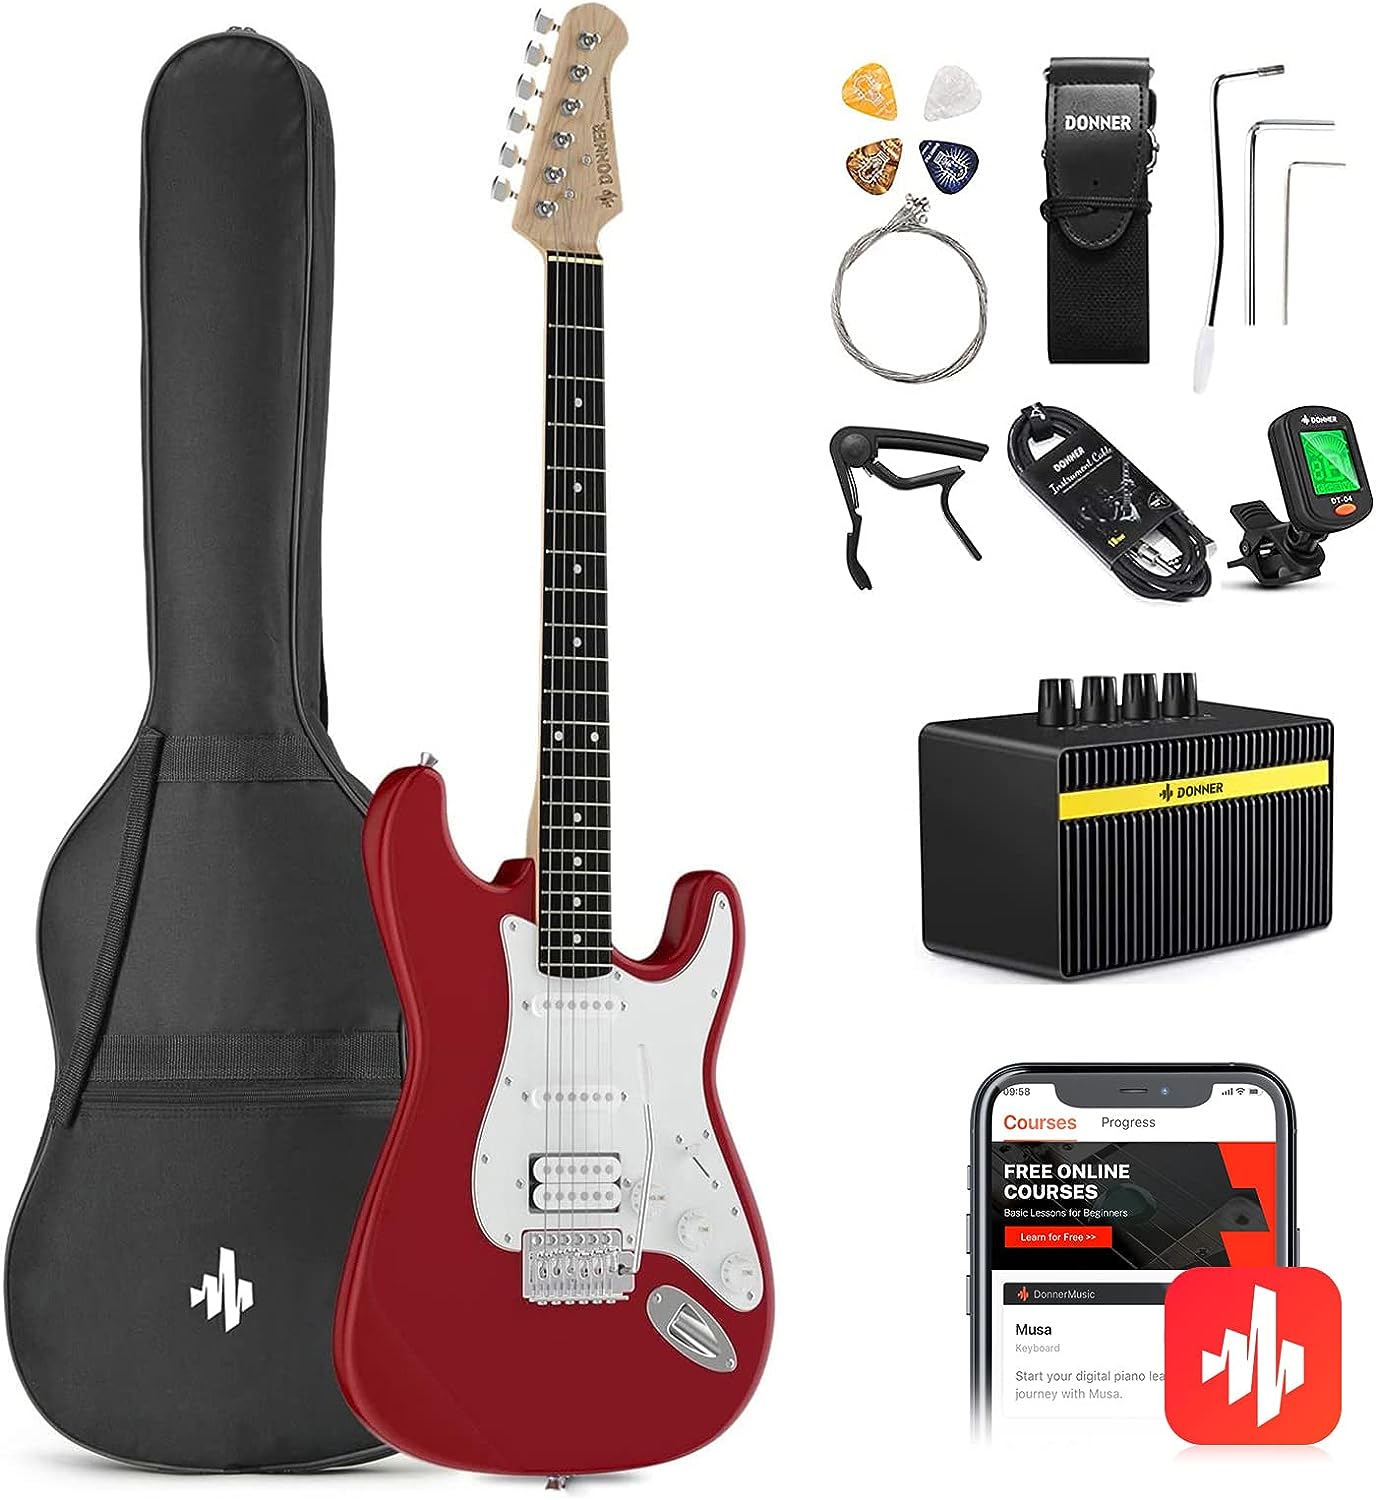 Donner DST-100R 39 Inch Electric Guitar Beginner Kit on a white background